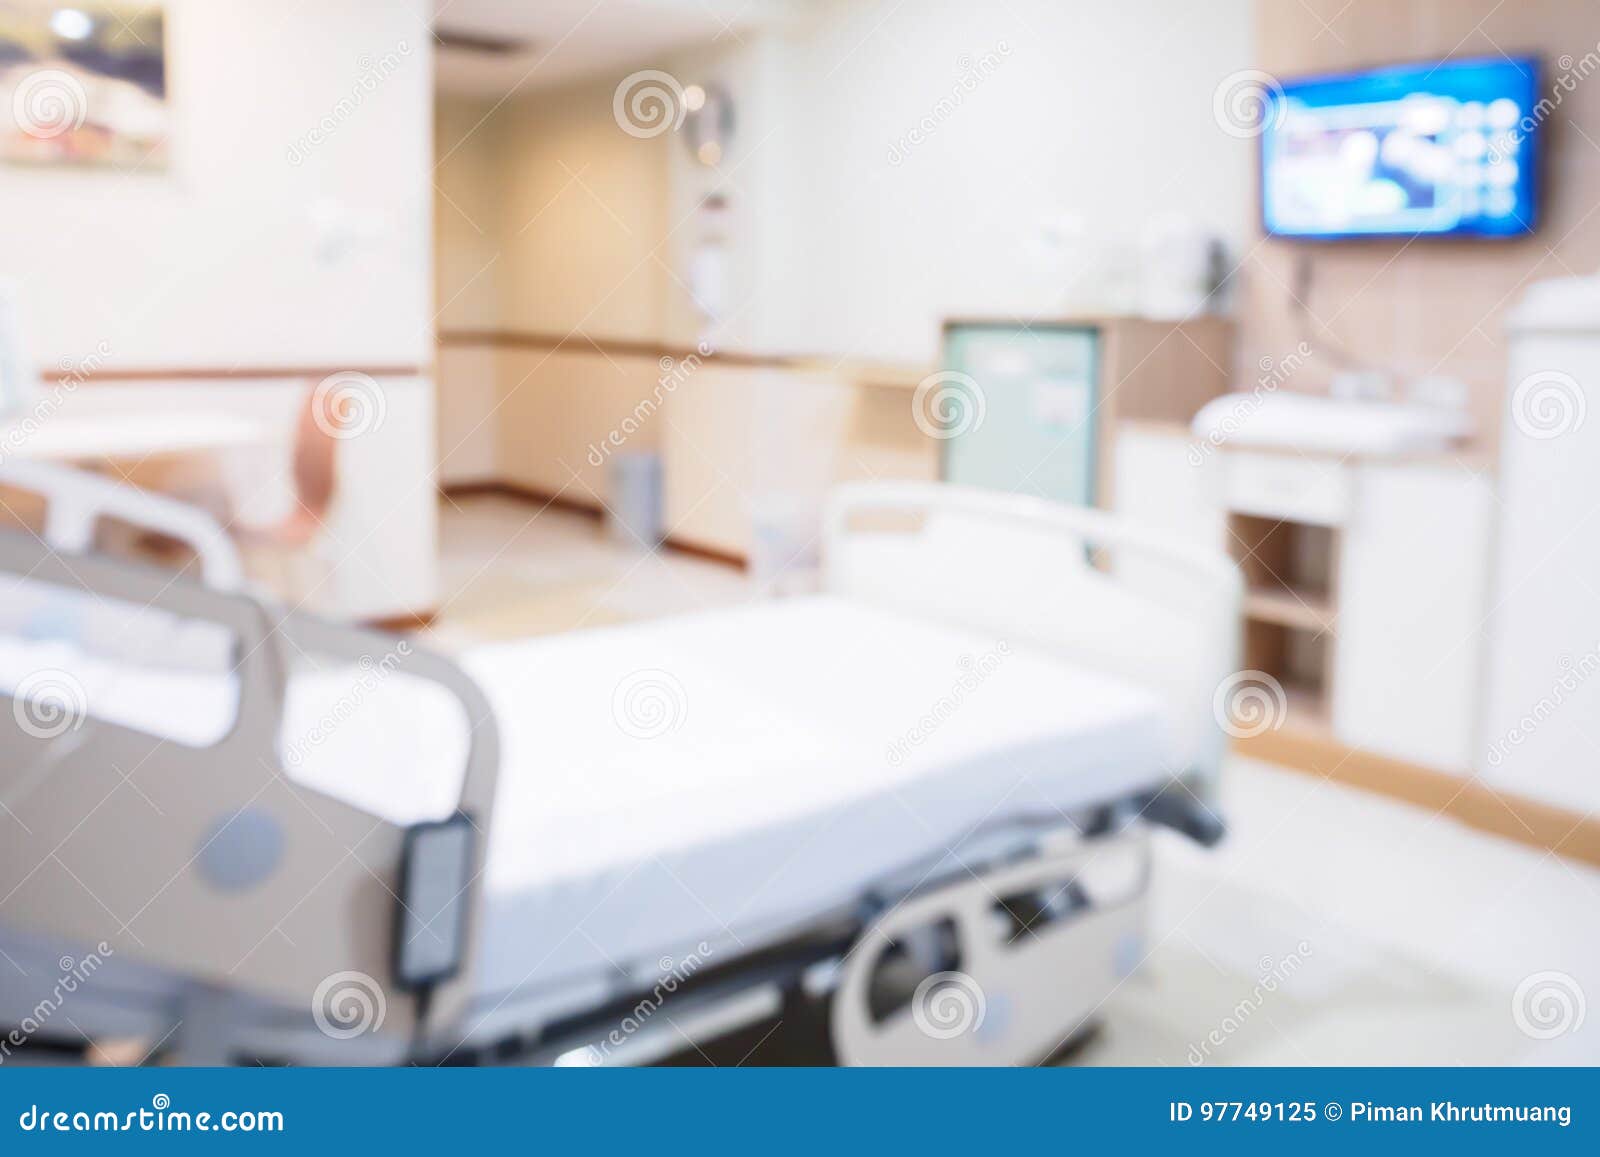 Abstract Blur Hospital Room Interior with Medical Bed Stock Image - Image  of disease, exam: 97749125